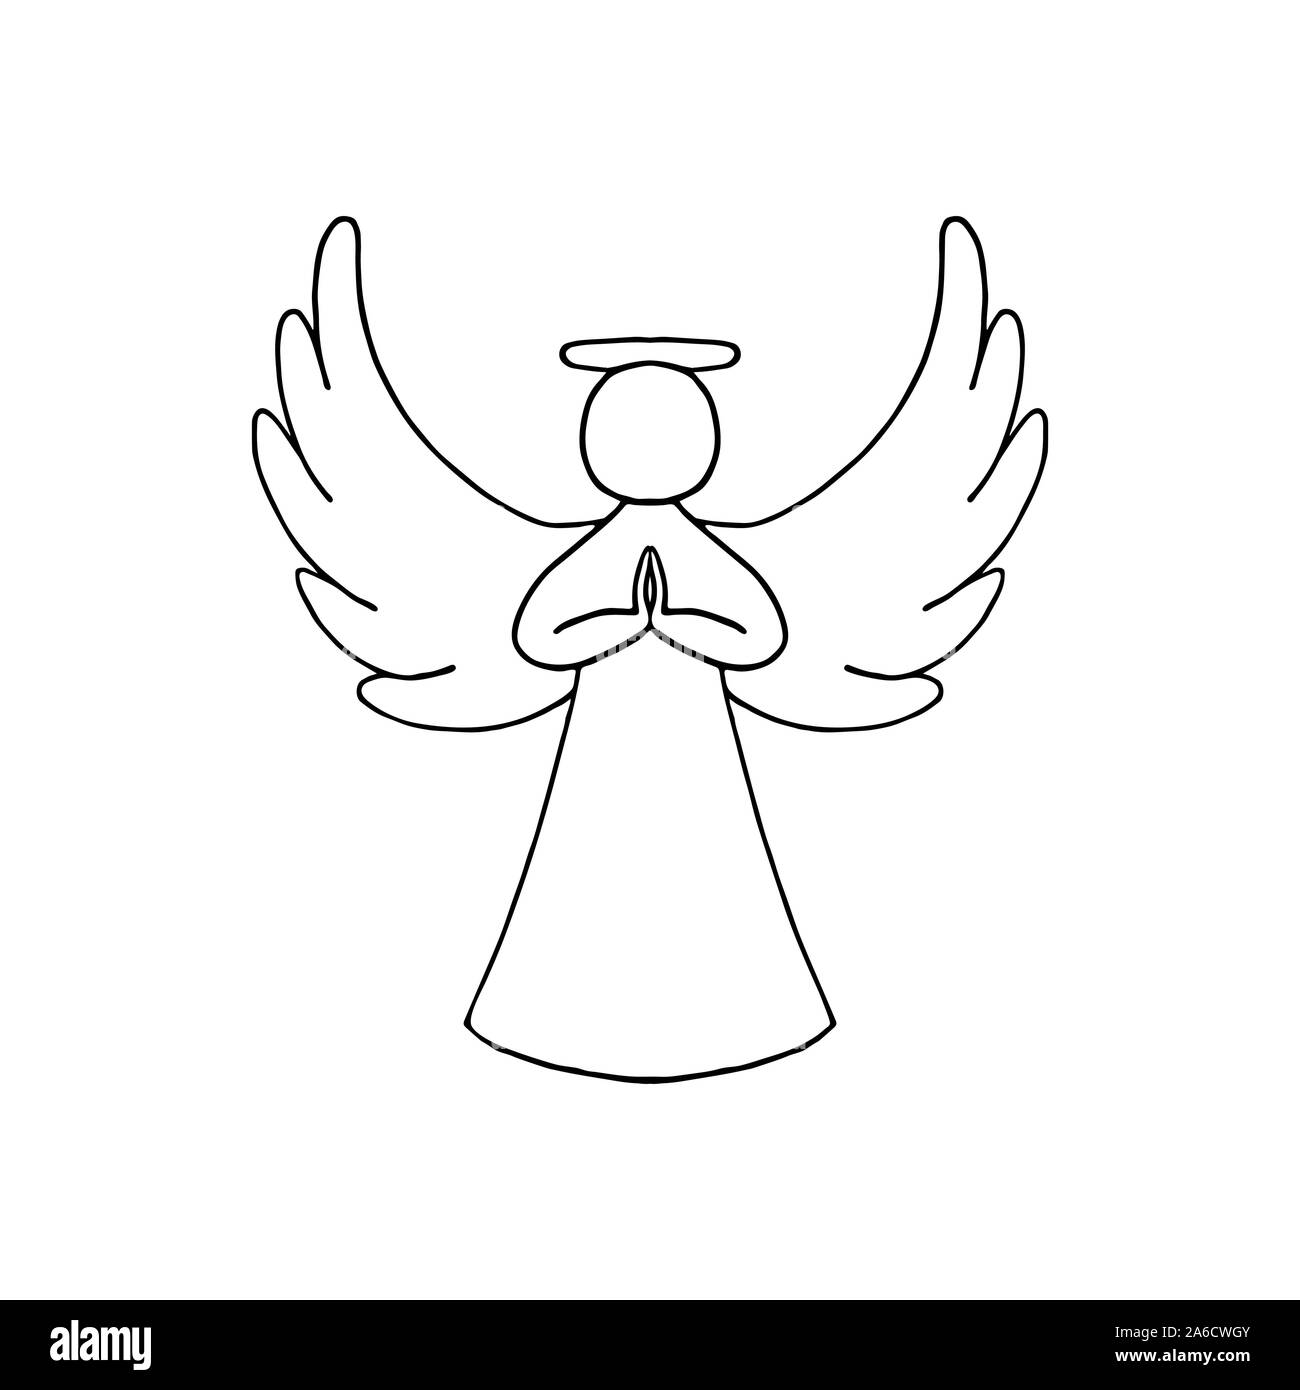 14,854 Angel Flying Silhouette Images, Stock Photos & Vectors | Shutterstock